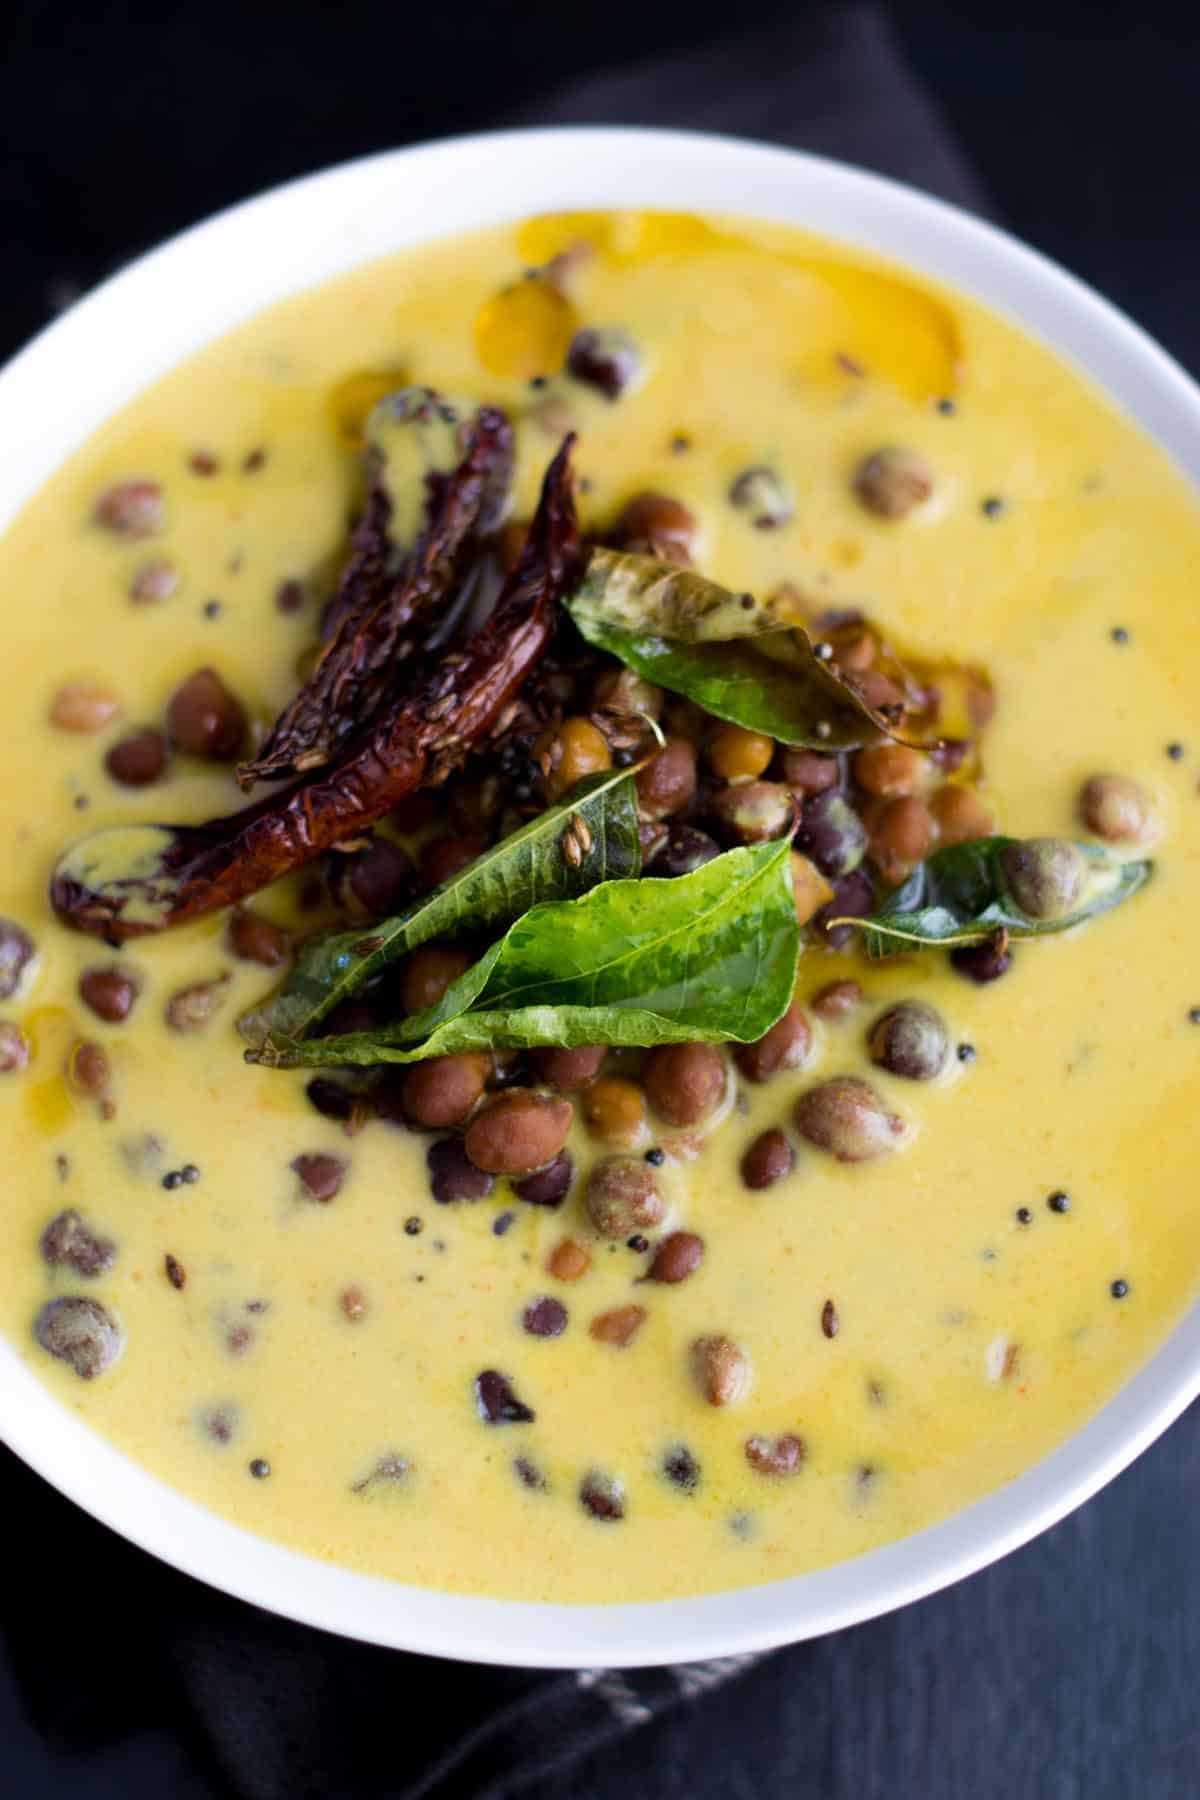 Kaale channe ki kadhi served in a white bowl with tempering of red chilies and curry leaves on top